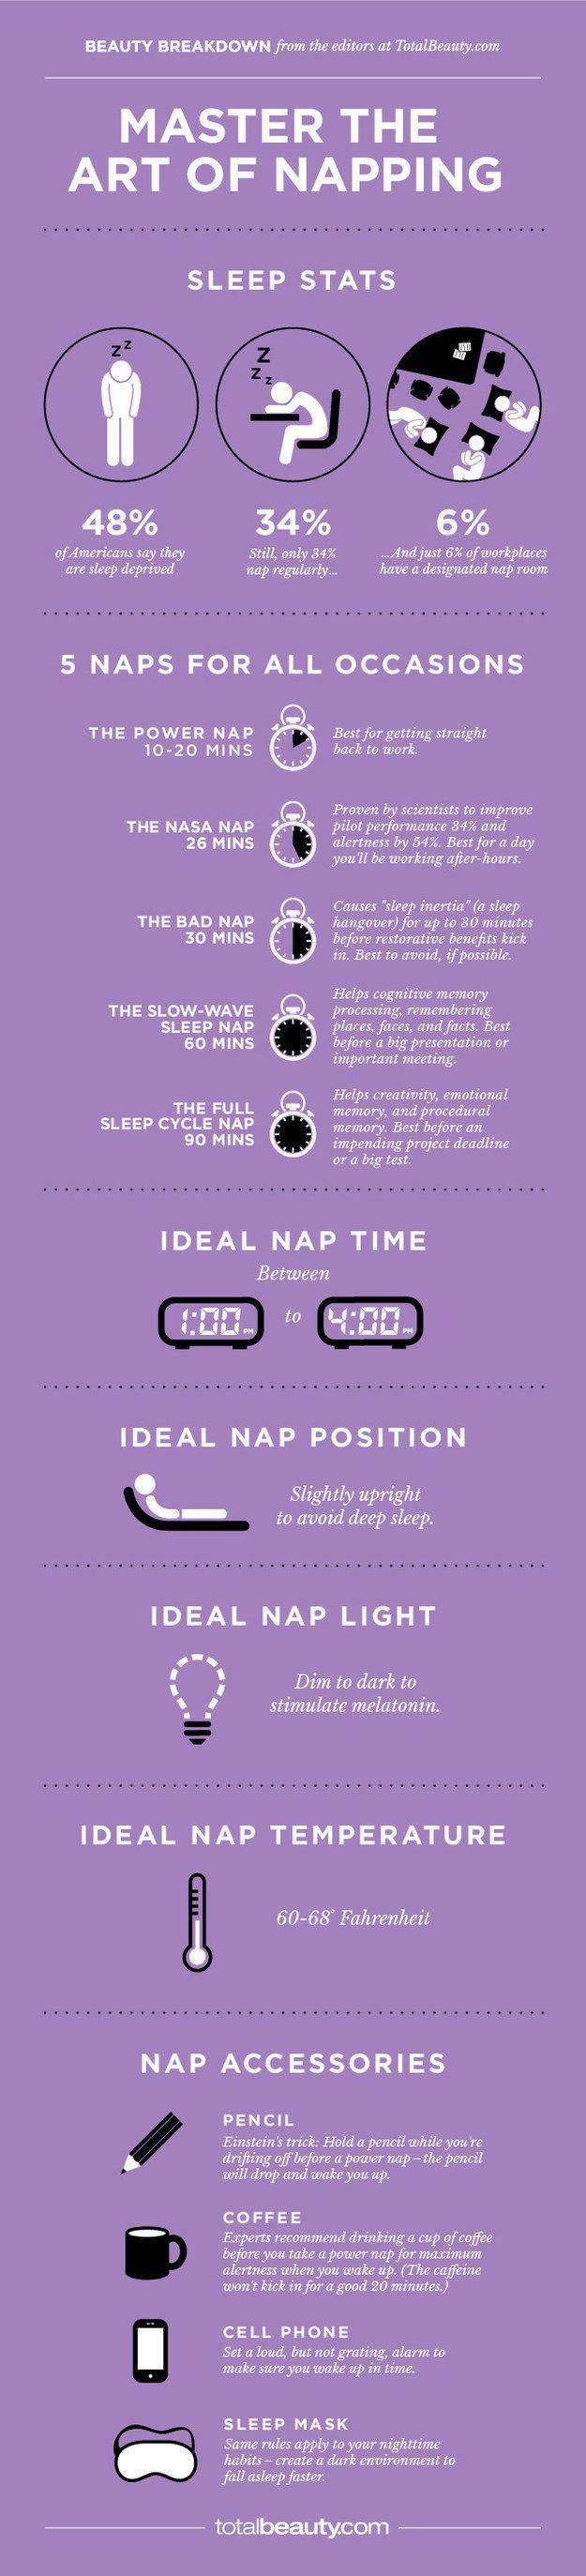 Everything You Ever Needed to Know about Sleep